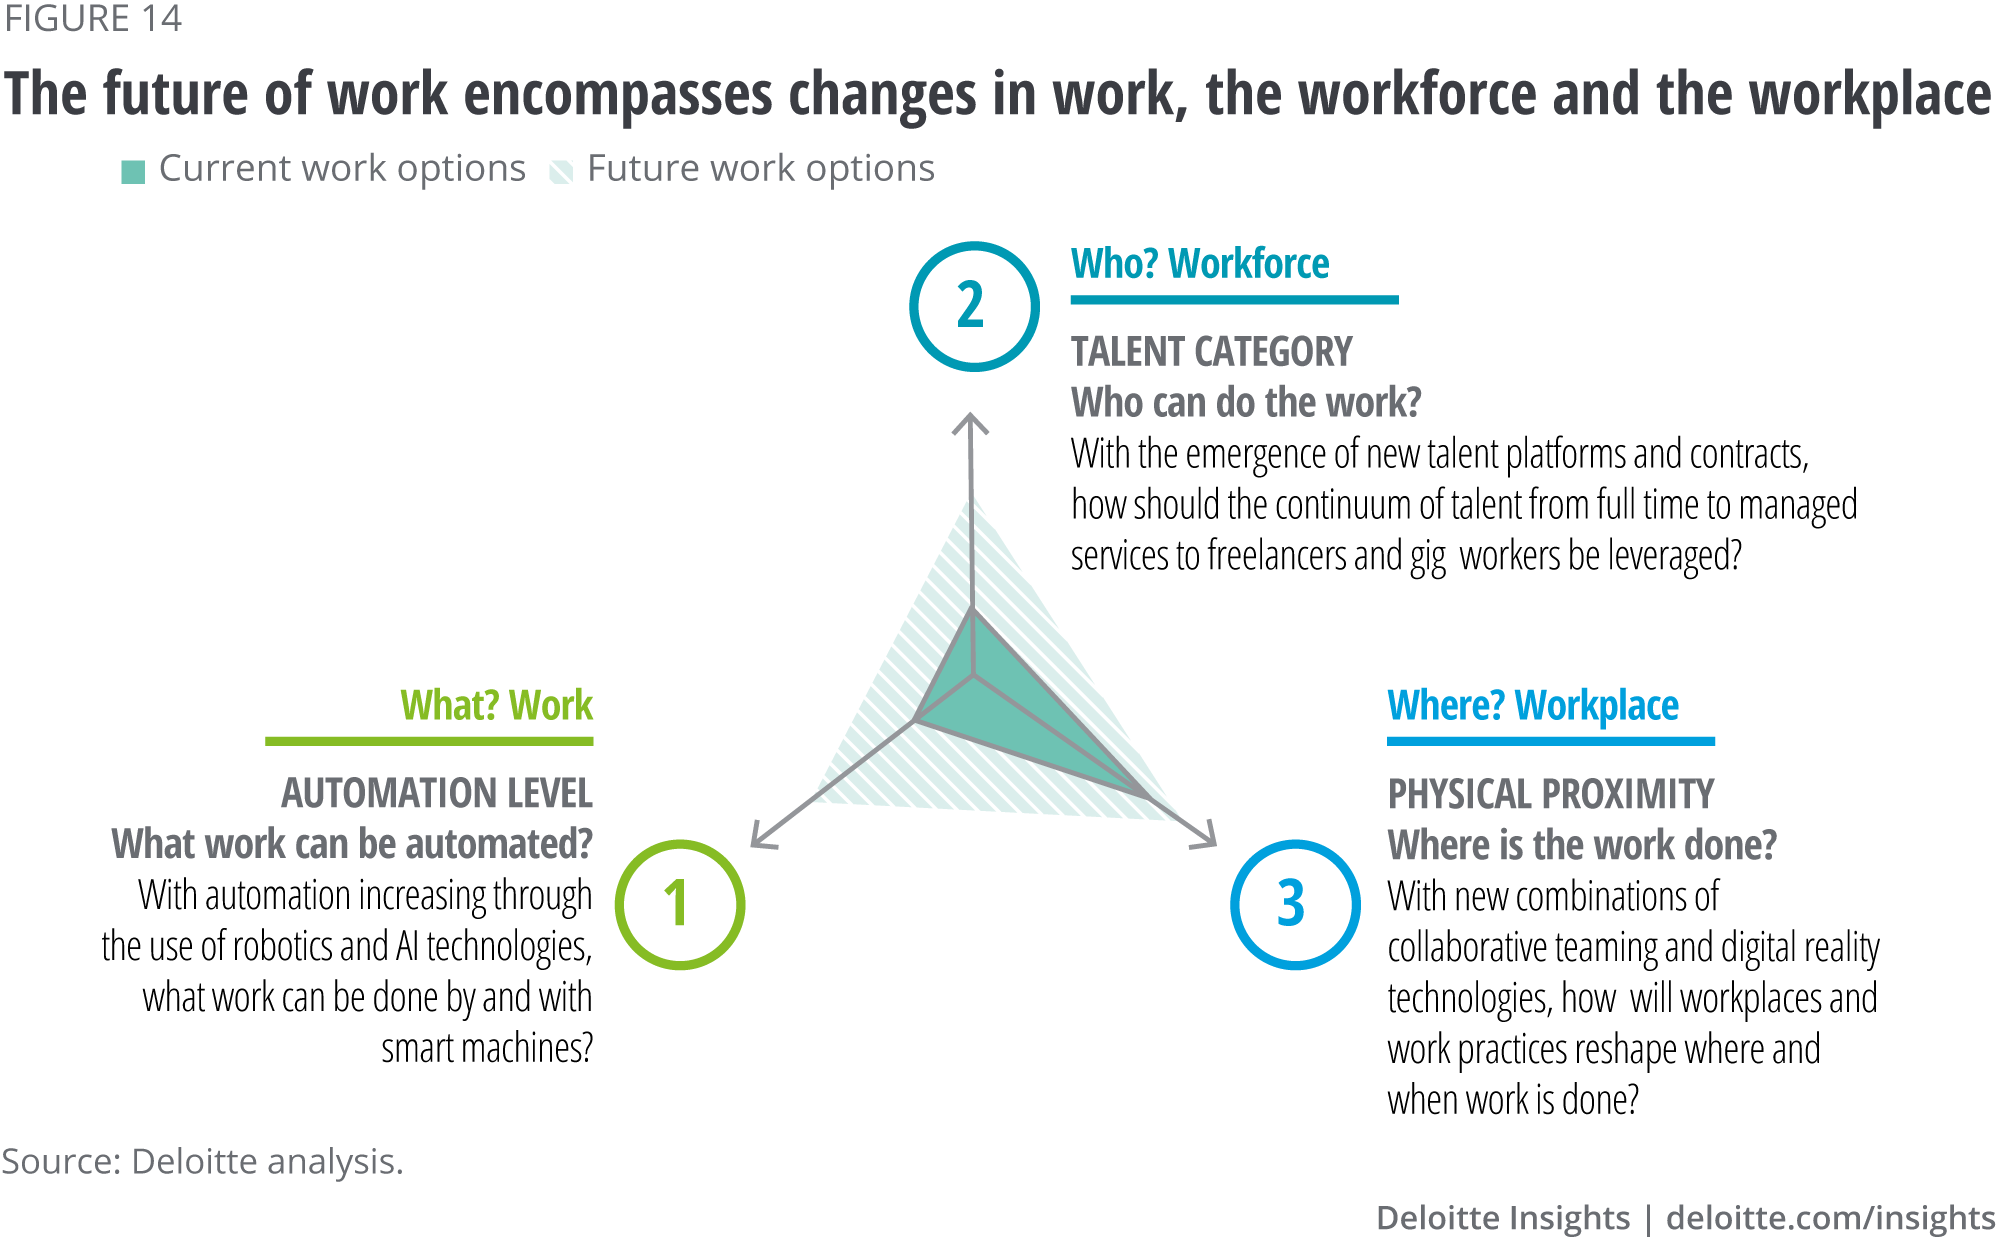 The future of work encompasses changes in work, the workforce and the workplace